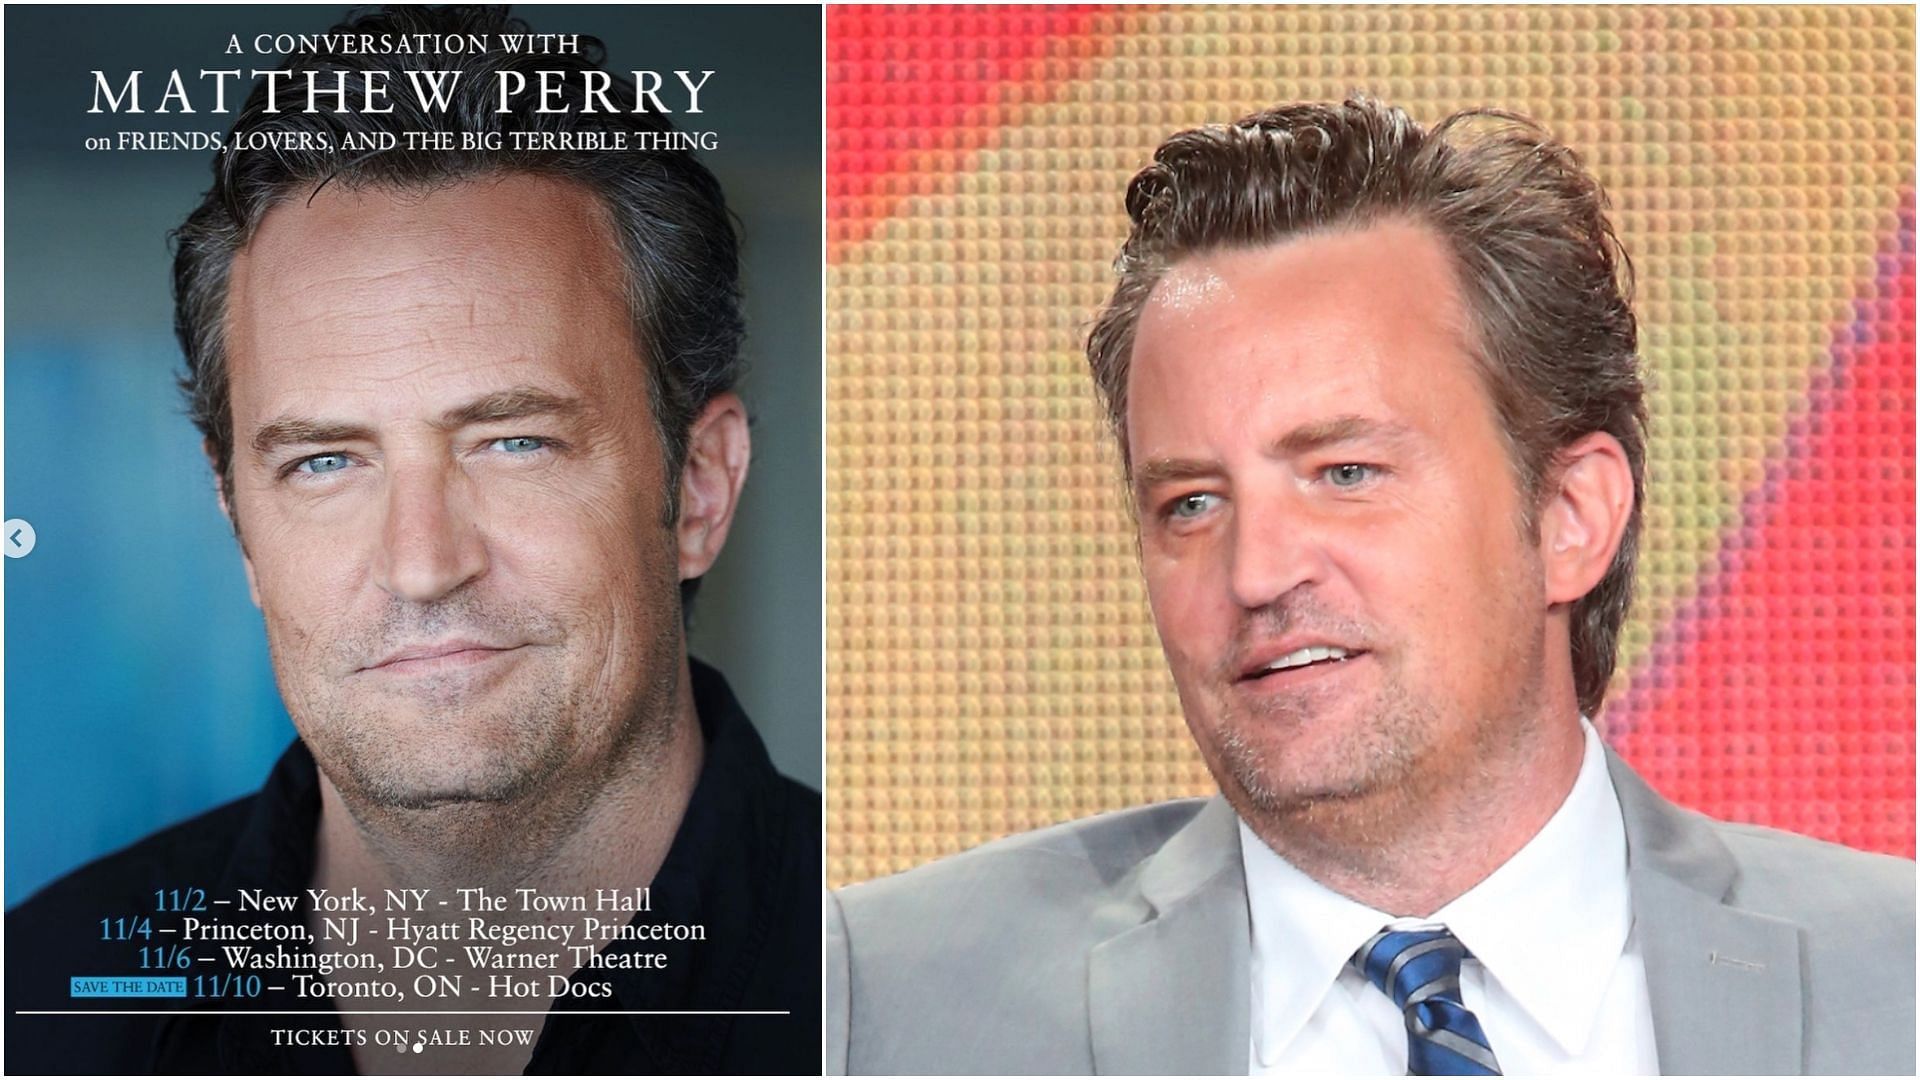 Matthew Perry has announced a book tour for this November. (Image via Instagram / Getty)